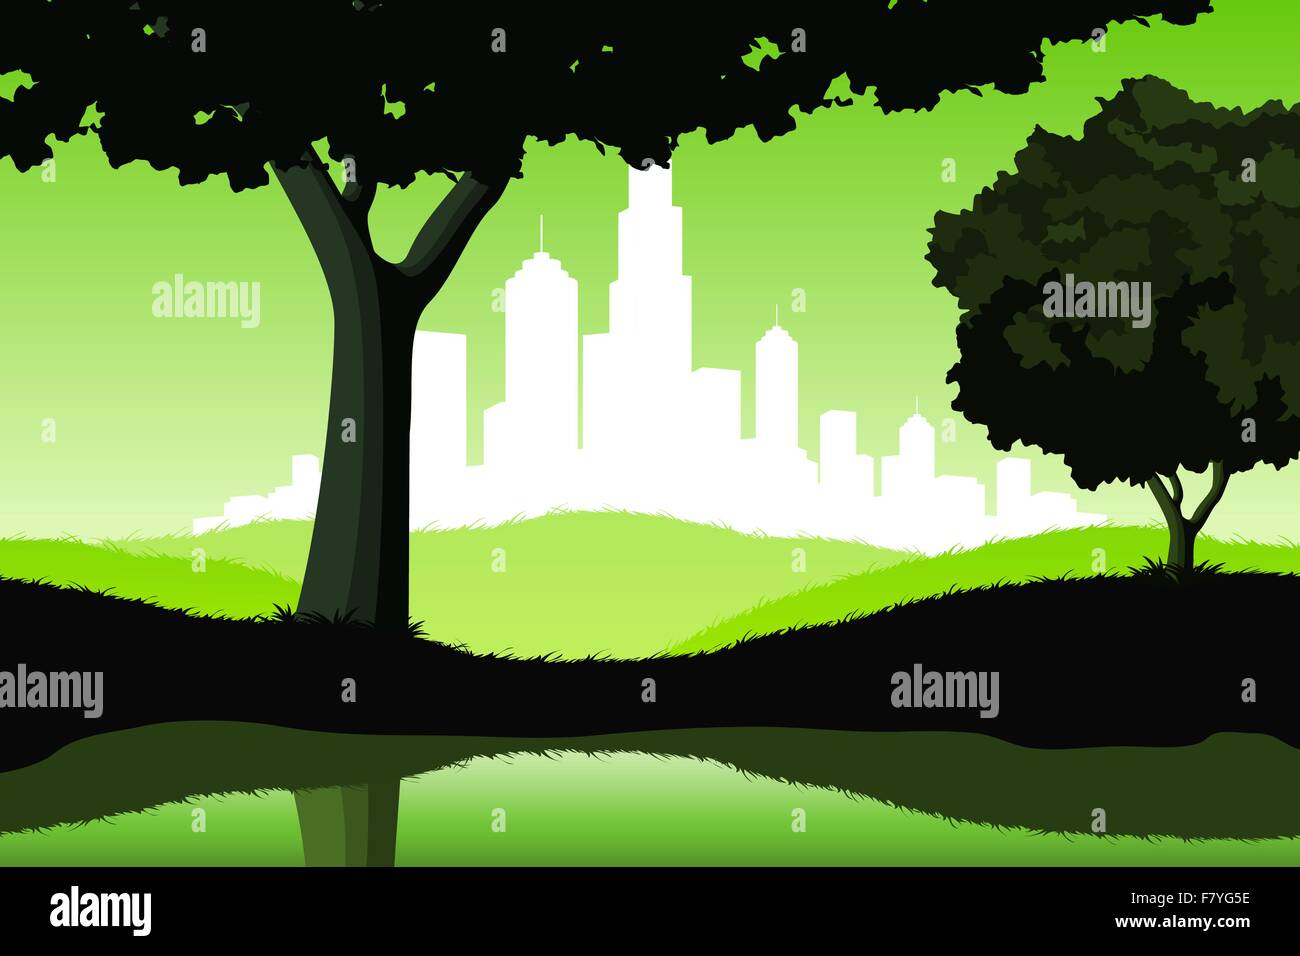 Night Landscape with trees and city silhouette Stock Vector